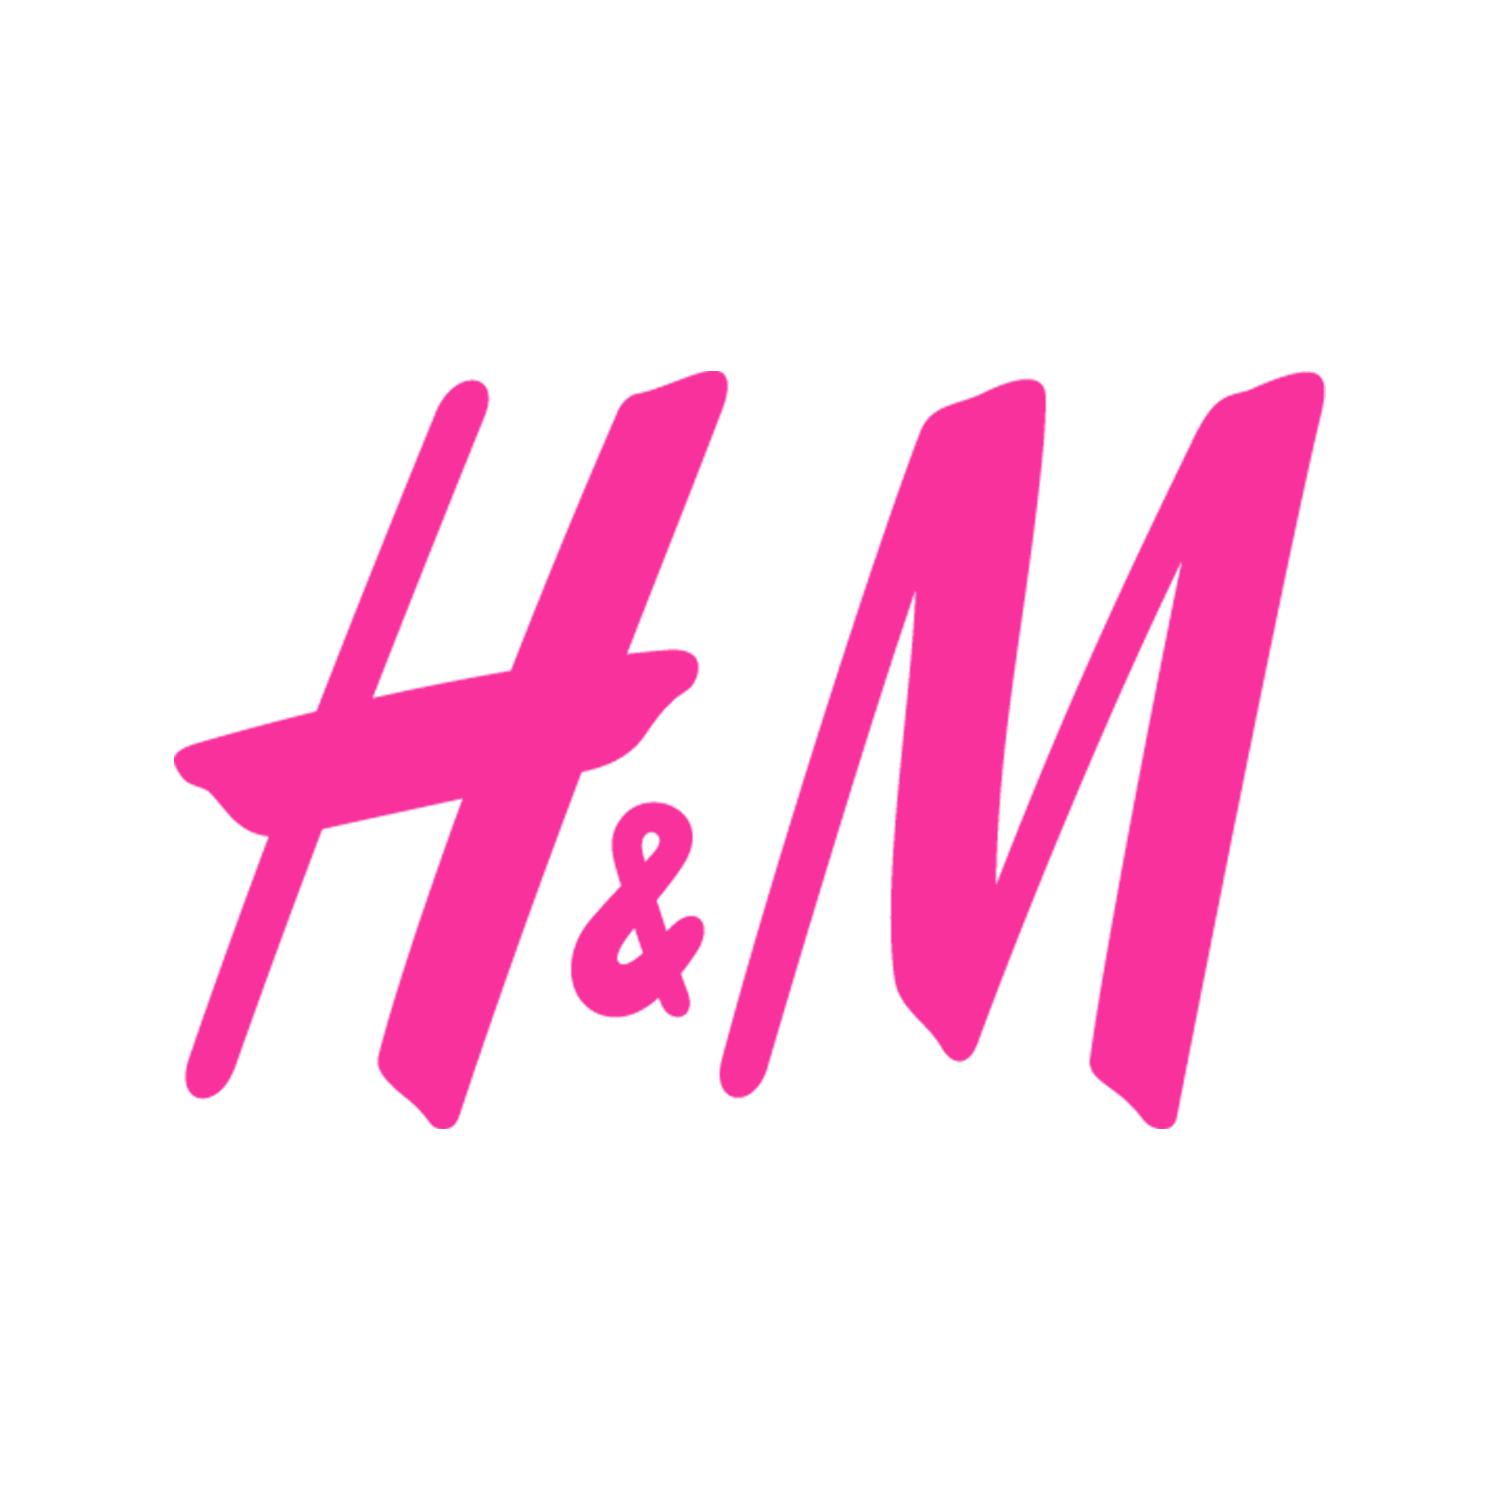 H&M 1-1.png